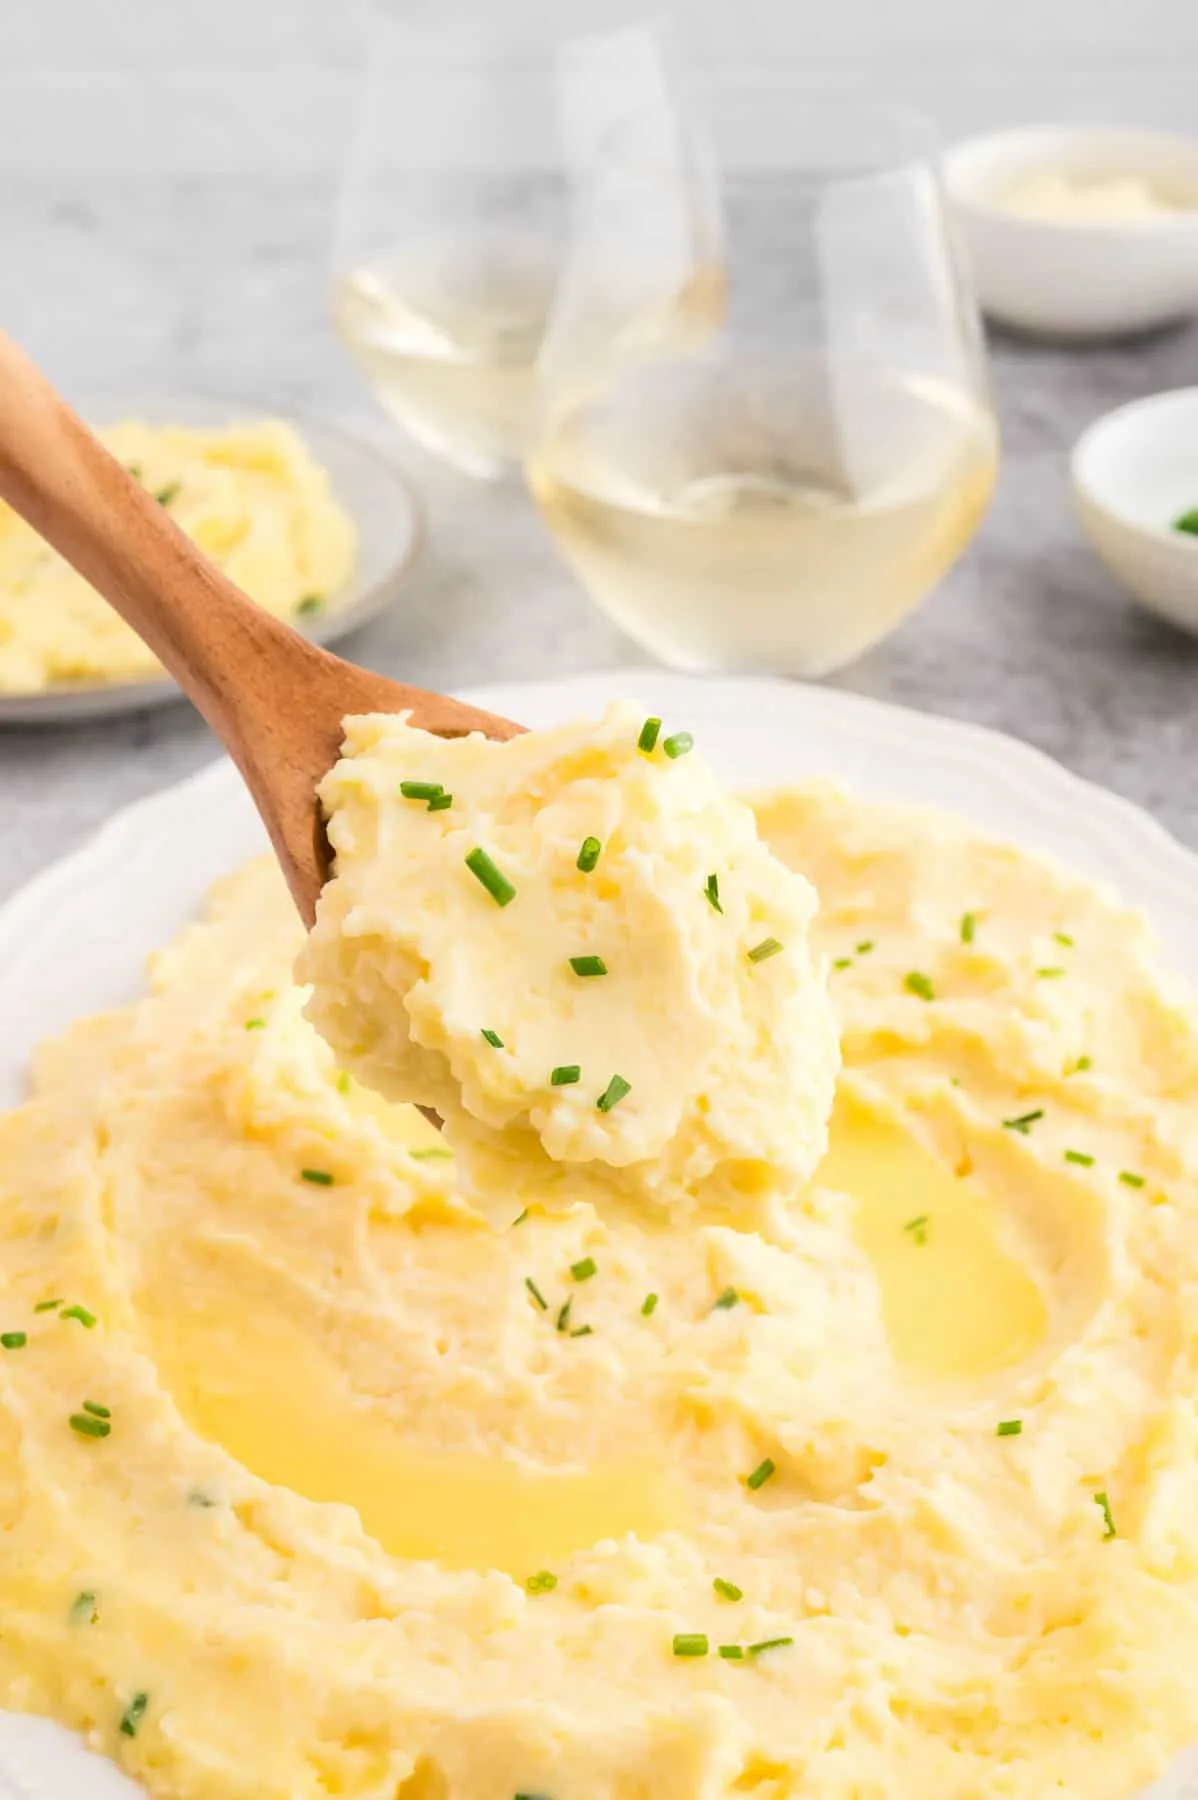 Sour Cream and Chive Mashed Potatoes are rich and creamy mashed potatoes loaded with sour cream, butter, milk and chopped chives.